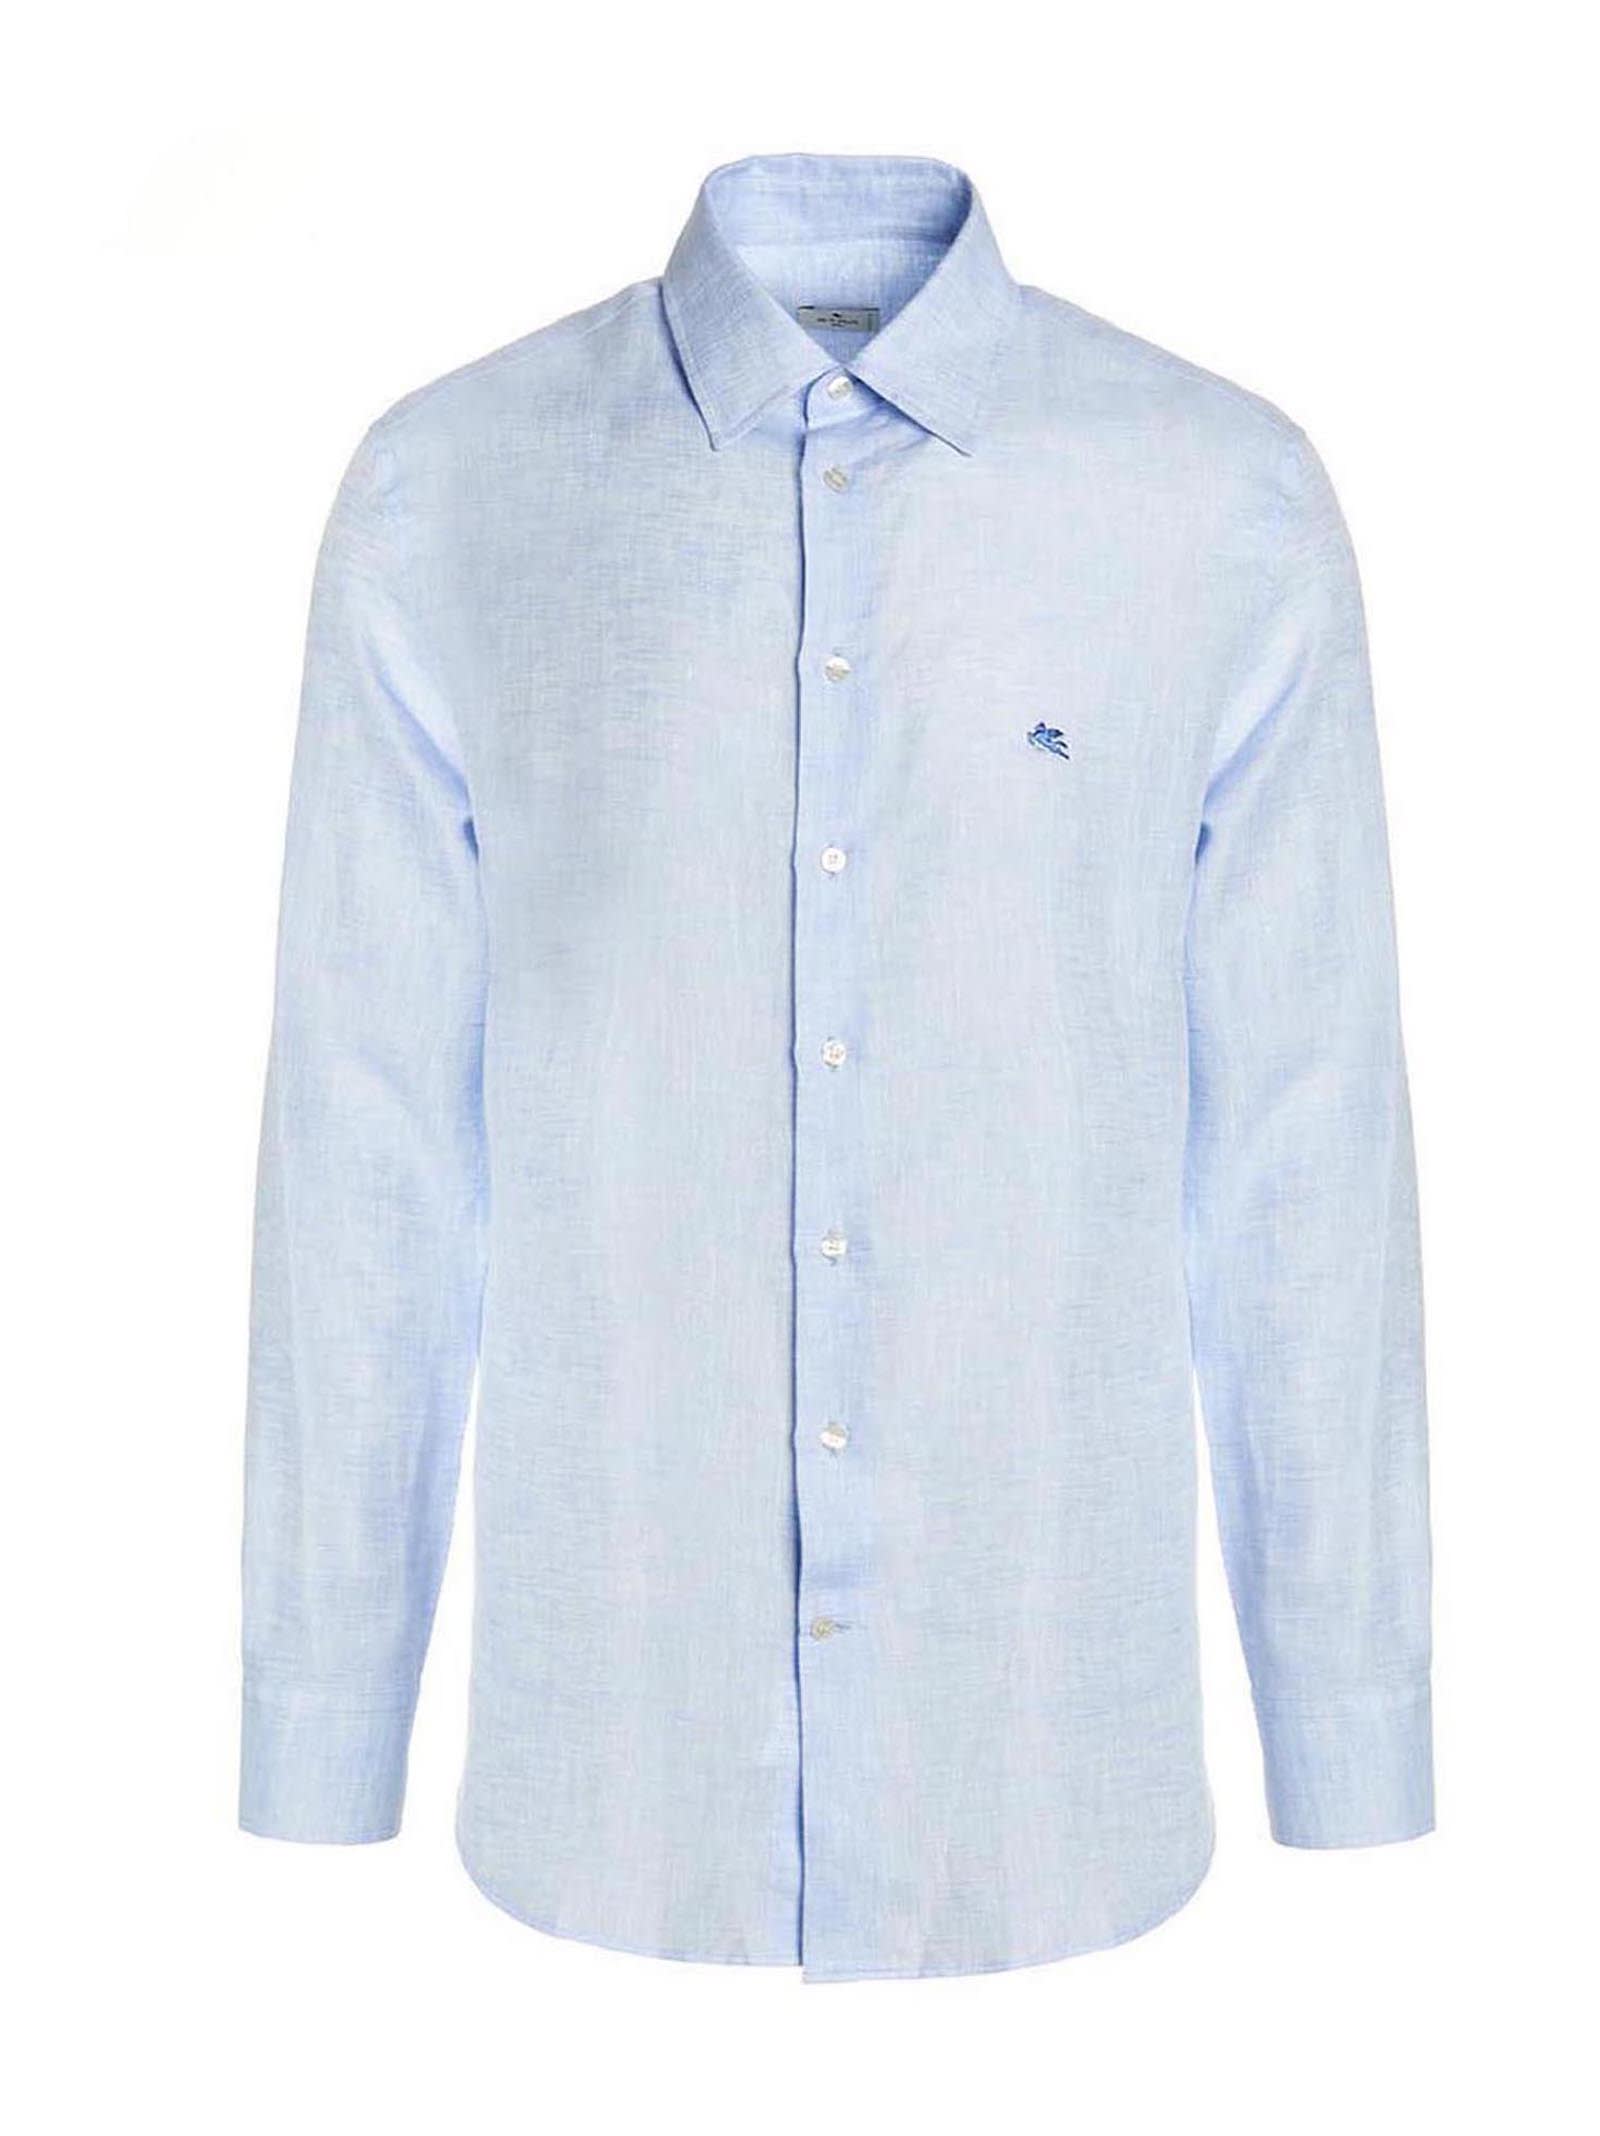 ETRO EMBROIDERED LINEN SHIRT